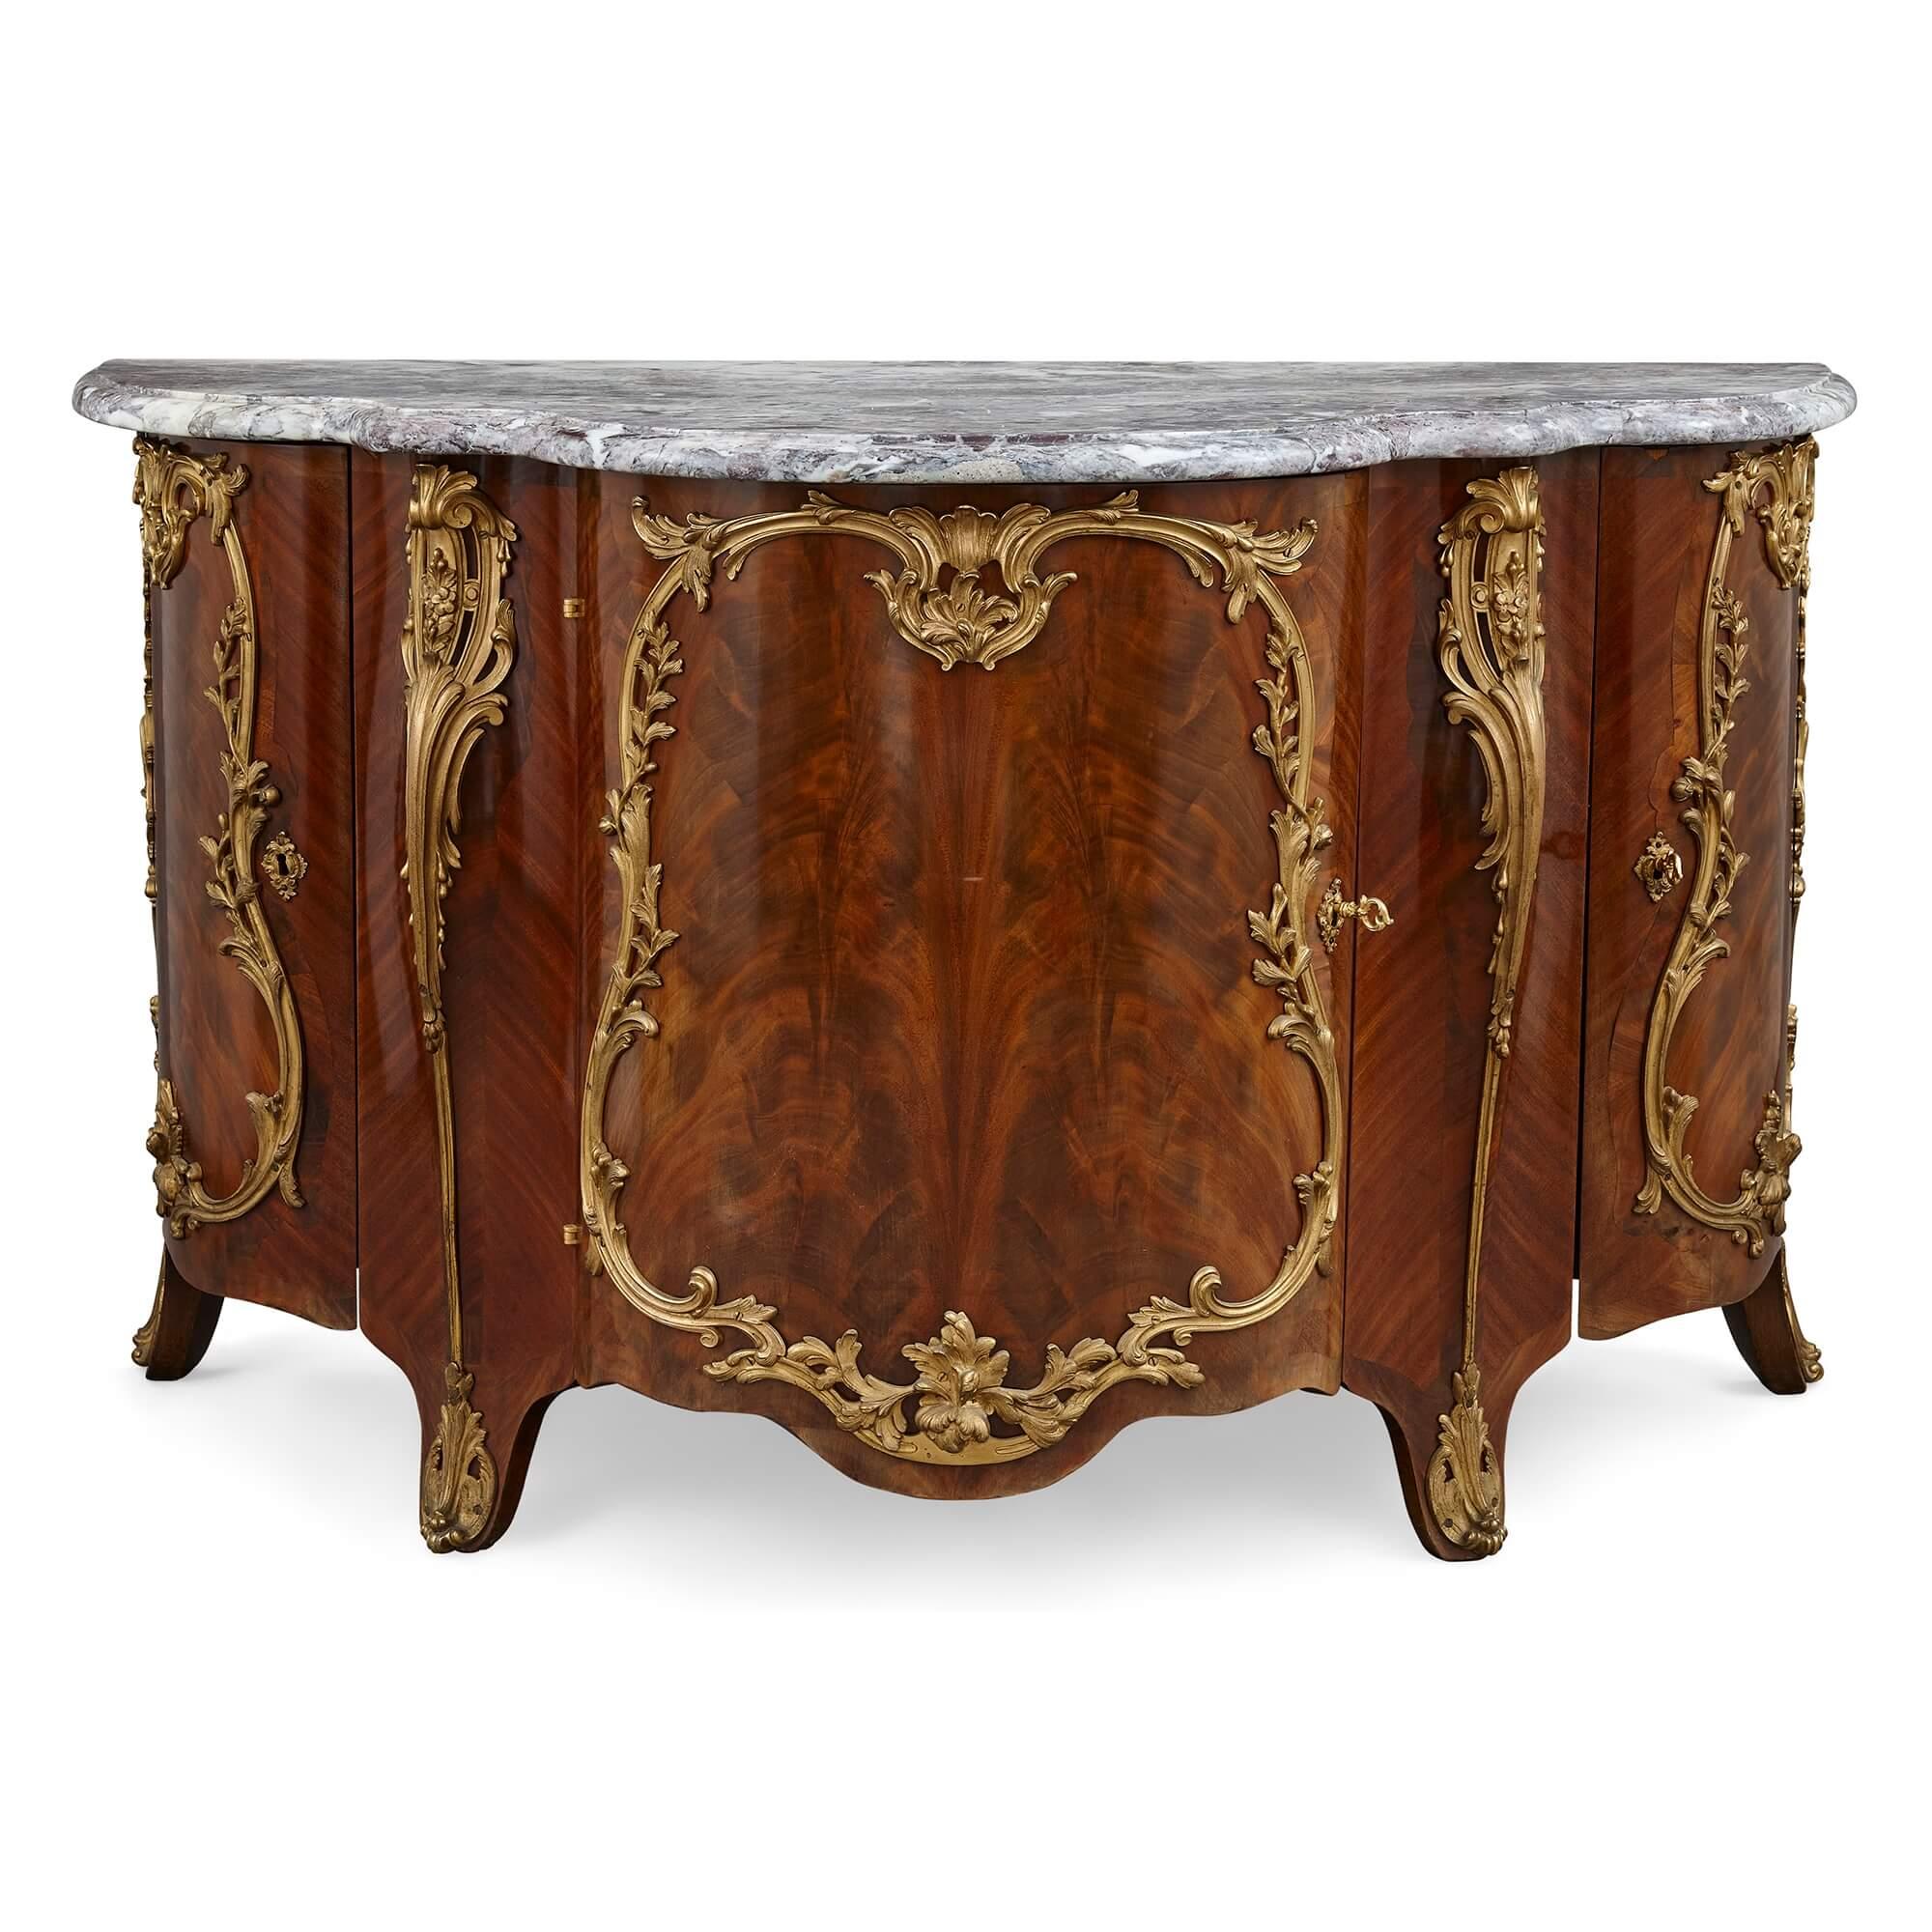 19th Century Pair of Louis XV Style Ormolu-Mounted Mahogany and Marble Commodes For Sale